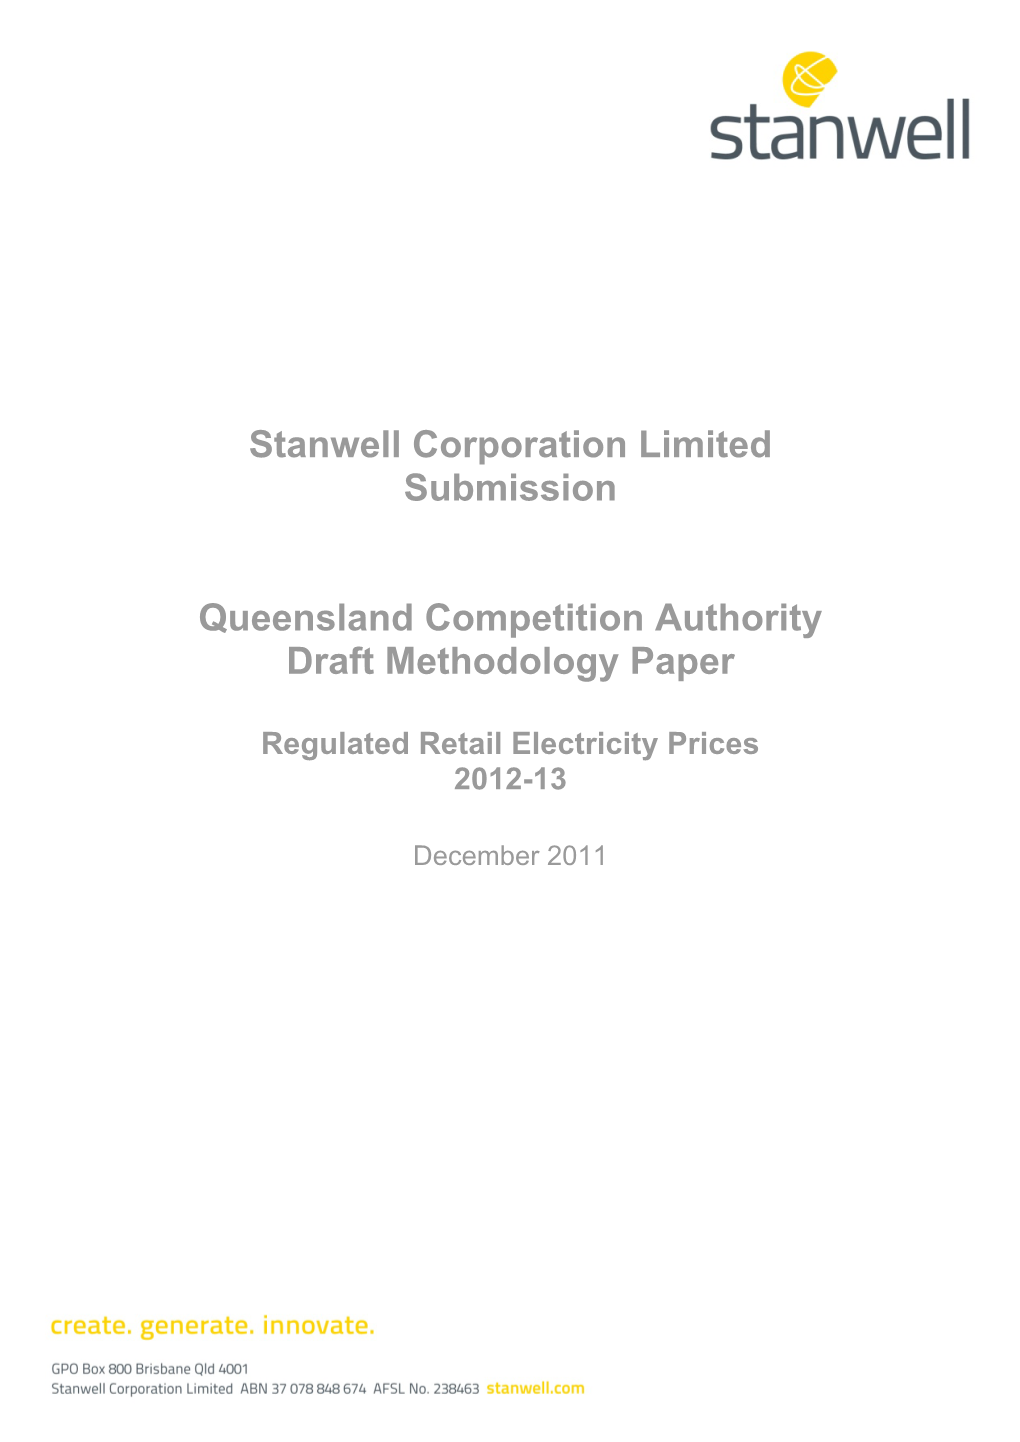 Stanwell Corporation Limited Submission Queensland Competition Authority Draft Methodology Paper